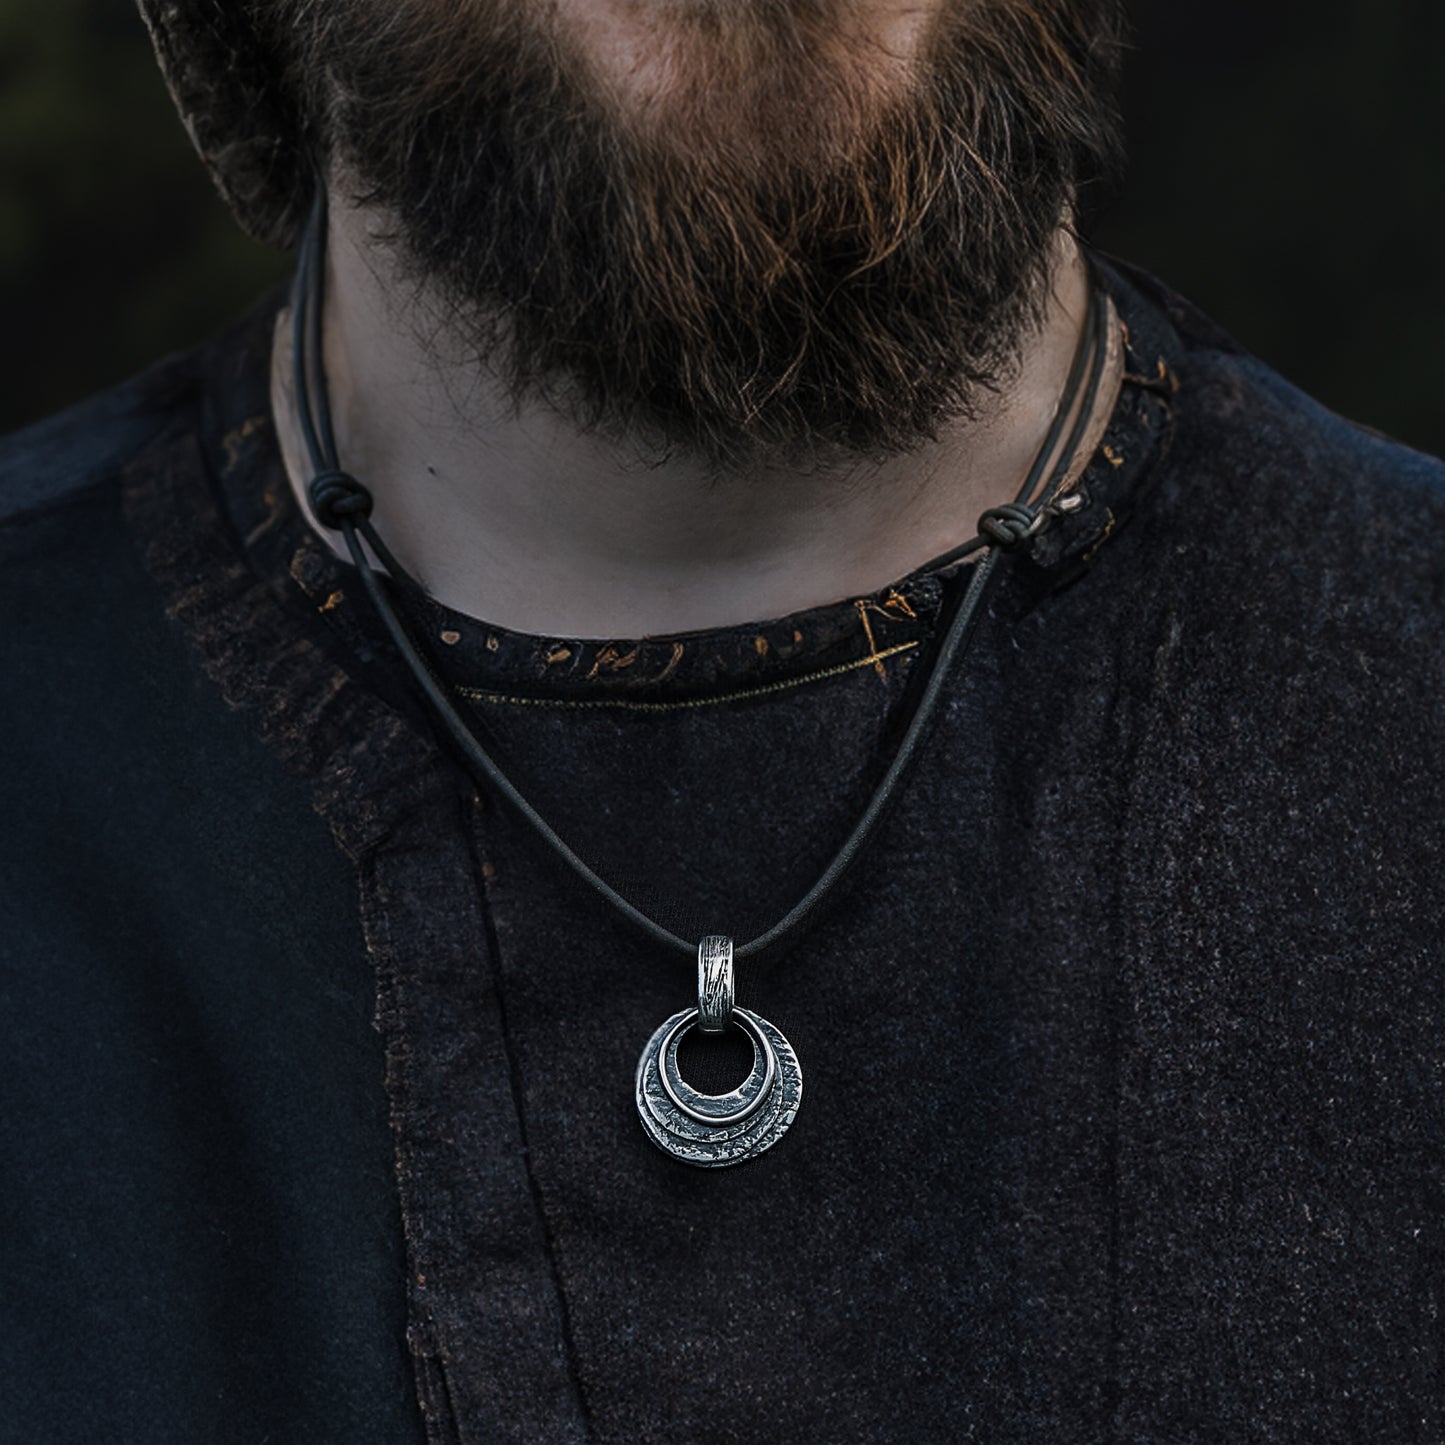 Round silver pendant with textures reminiscent of Viking art, crafted for the modern Pagan.